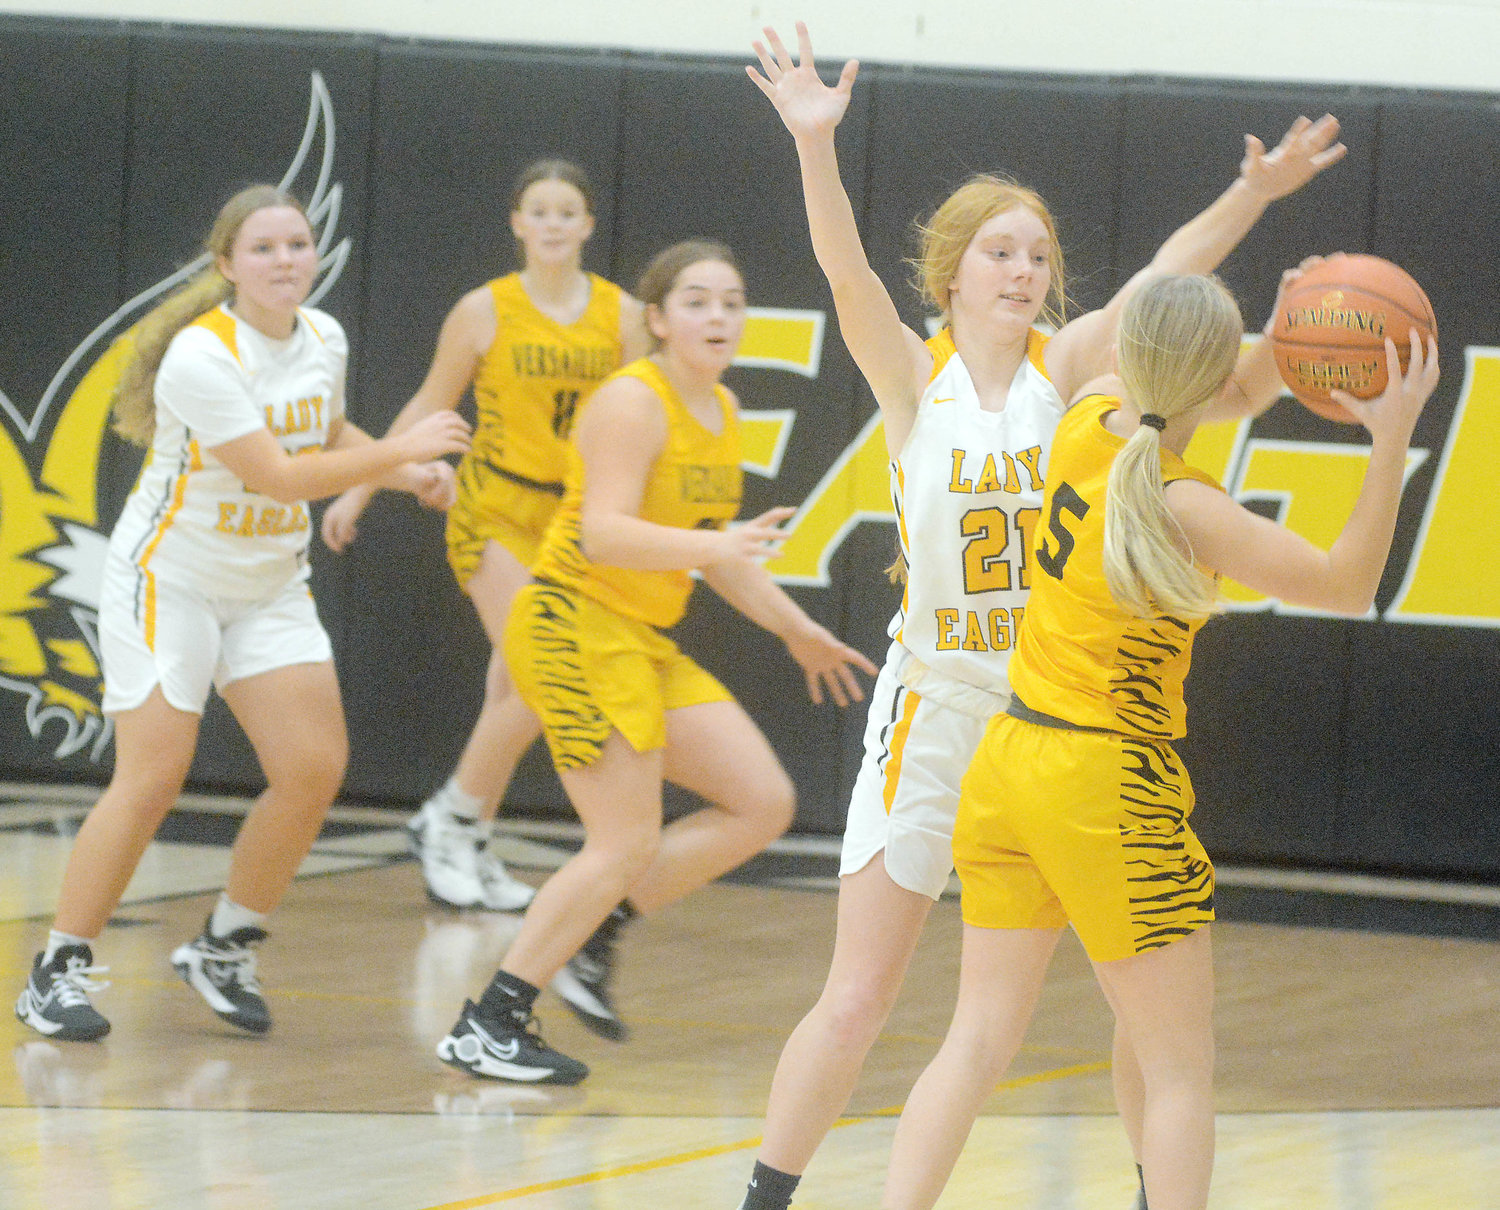 Madison Weeks (far right) plays defense against Versailles’ Lady Tigers. Both Vienna’s Lady Eagle and Eagle basketball teams will look to snap losing streaks to start 2023.